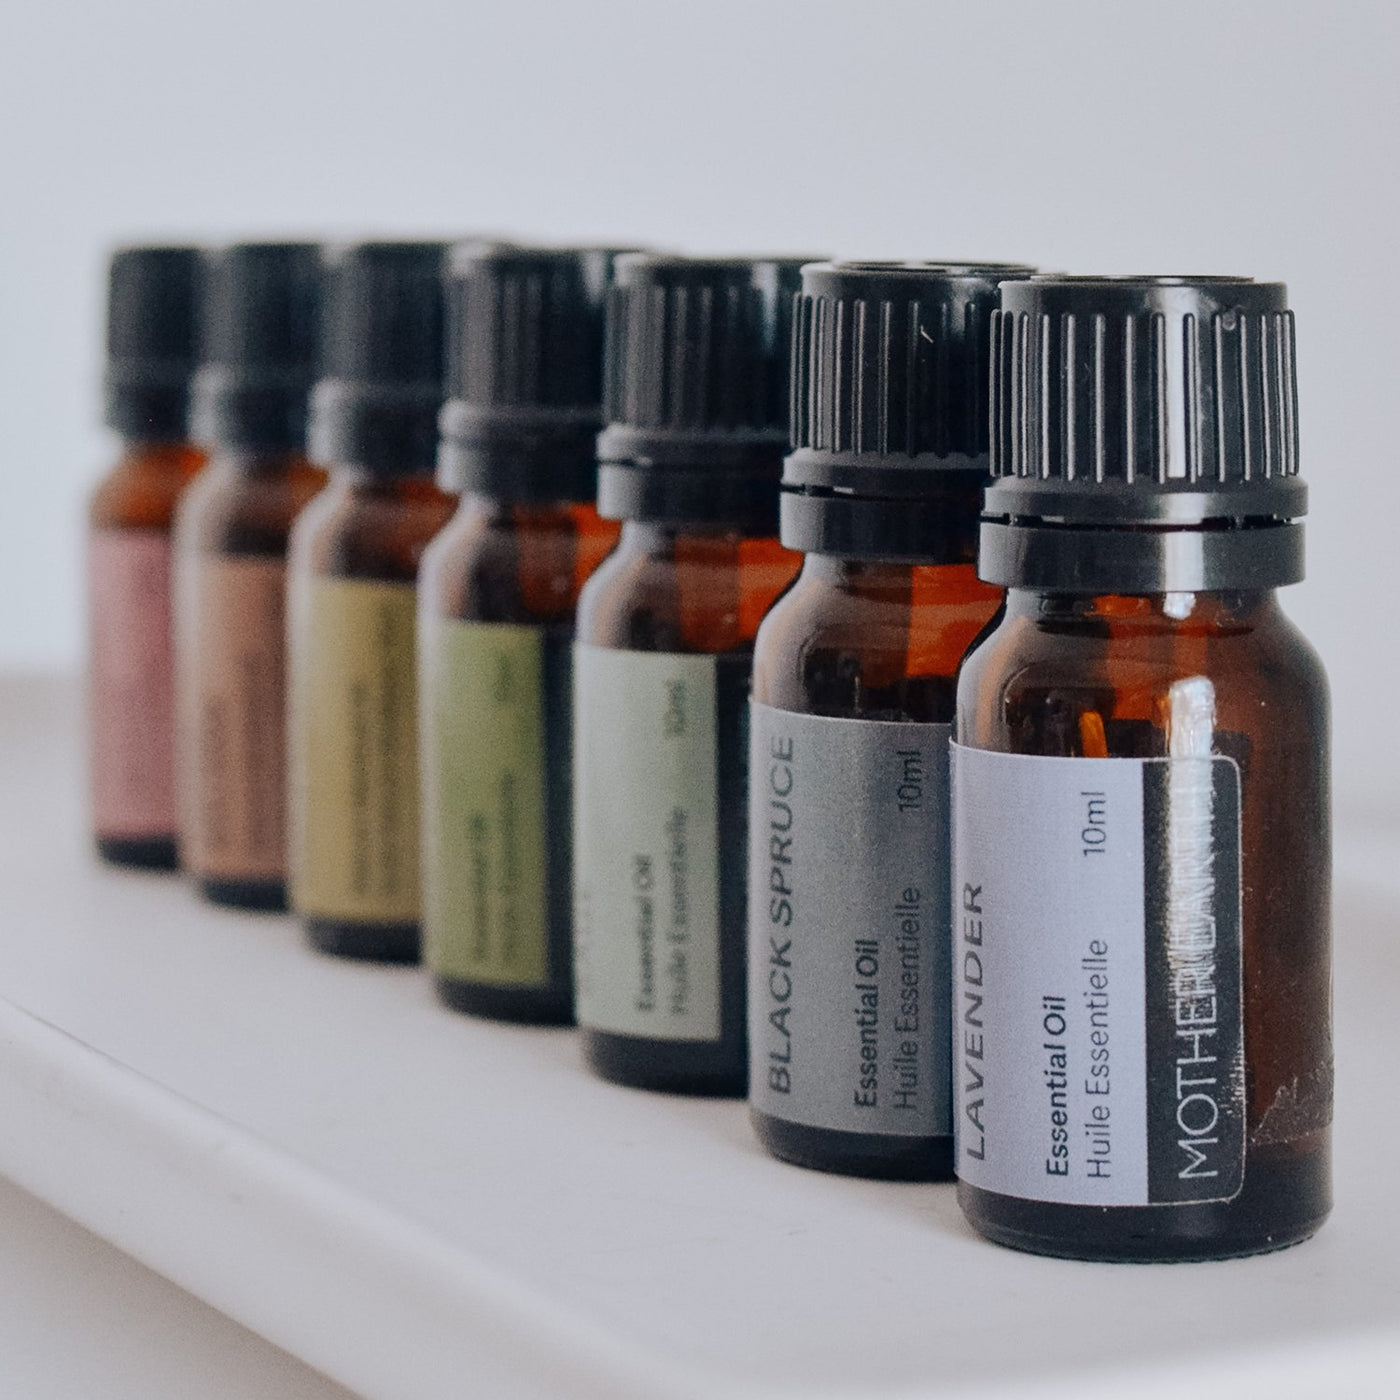 Top 10 Best Essential Oils in Vancouver, BC - March 2022 - Yelp